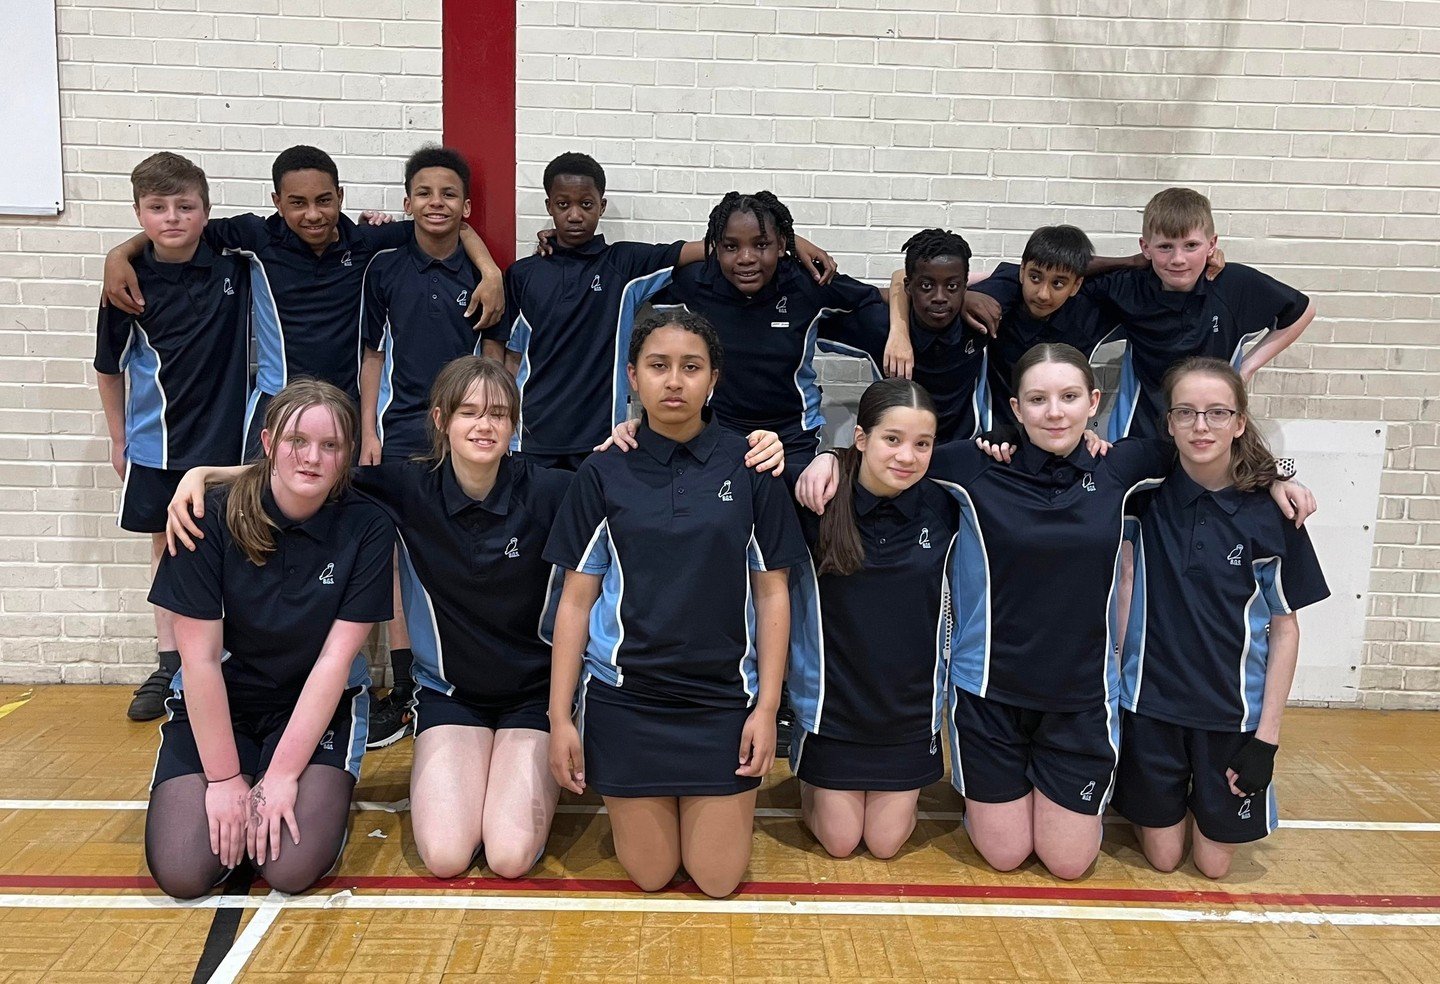 We took two teams to St Thomas Aquinas to take part in The Birmingham School Games Dodgeball Tournament. It was great fun, with Mrs Egerton's team finishing 4th and Miss Smallwood's 2nd. Well done to all those who played.